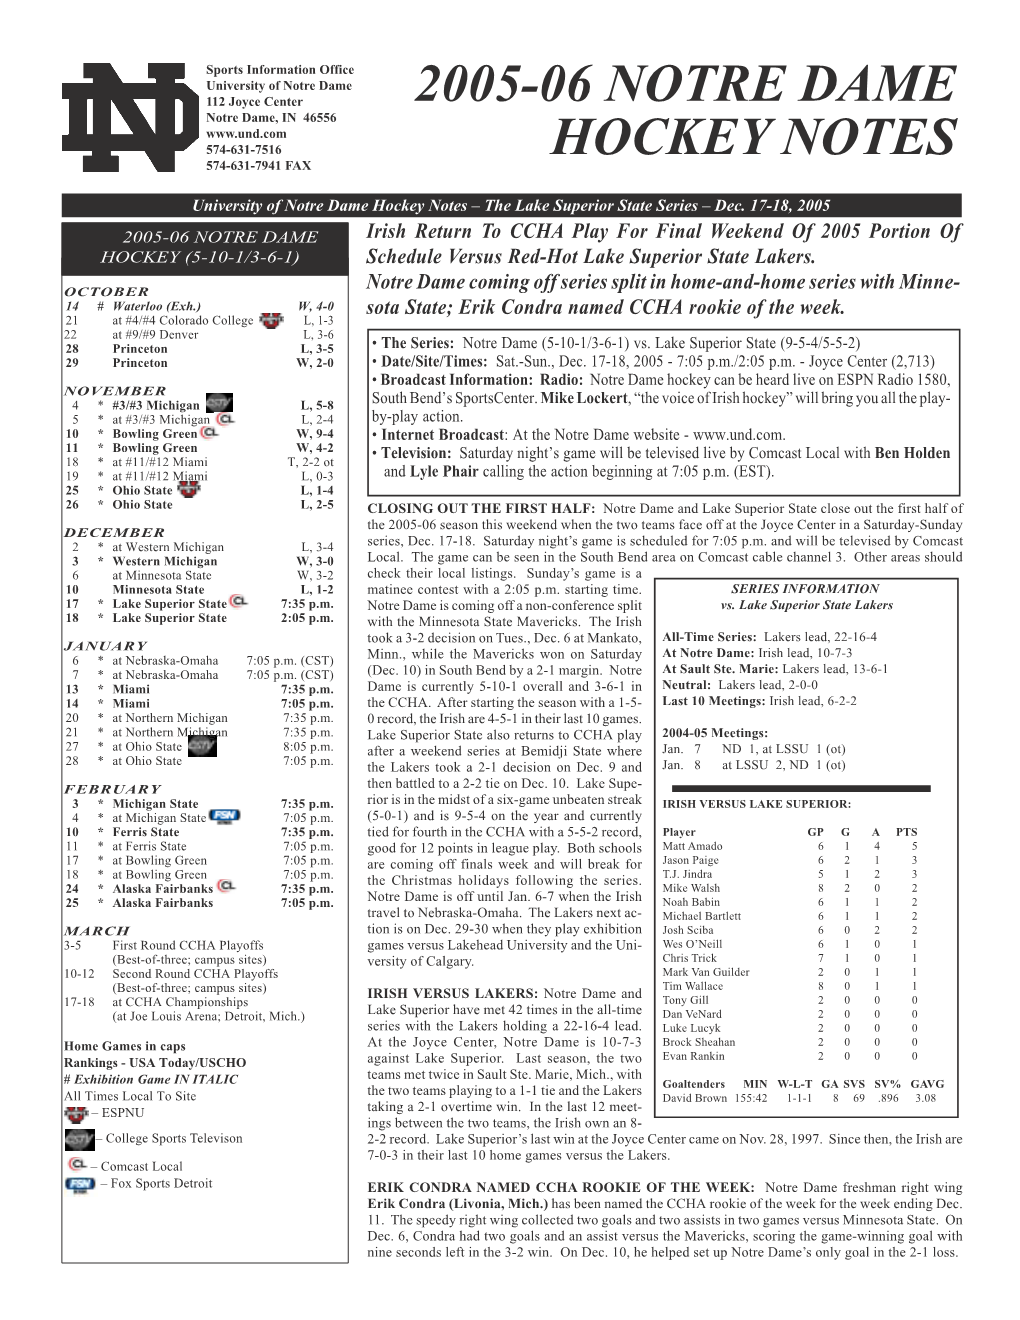 2005-06 Notre Dame Hockey Notes